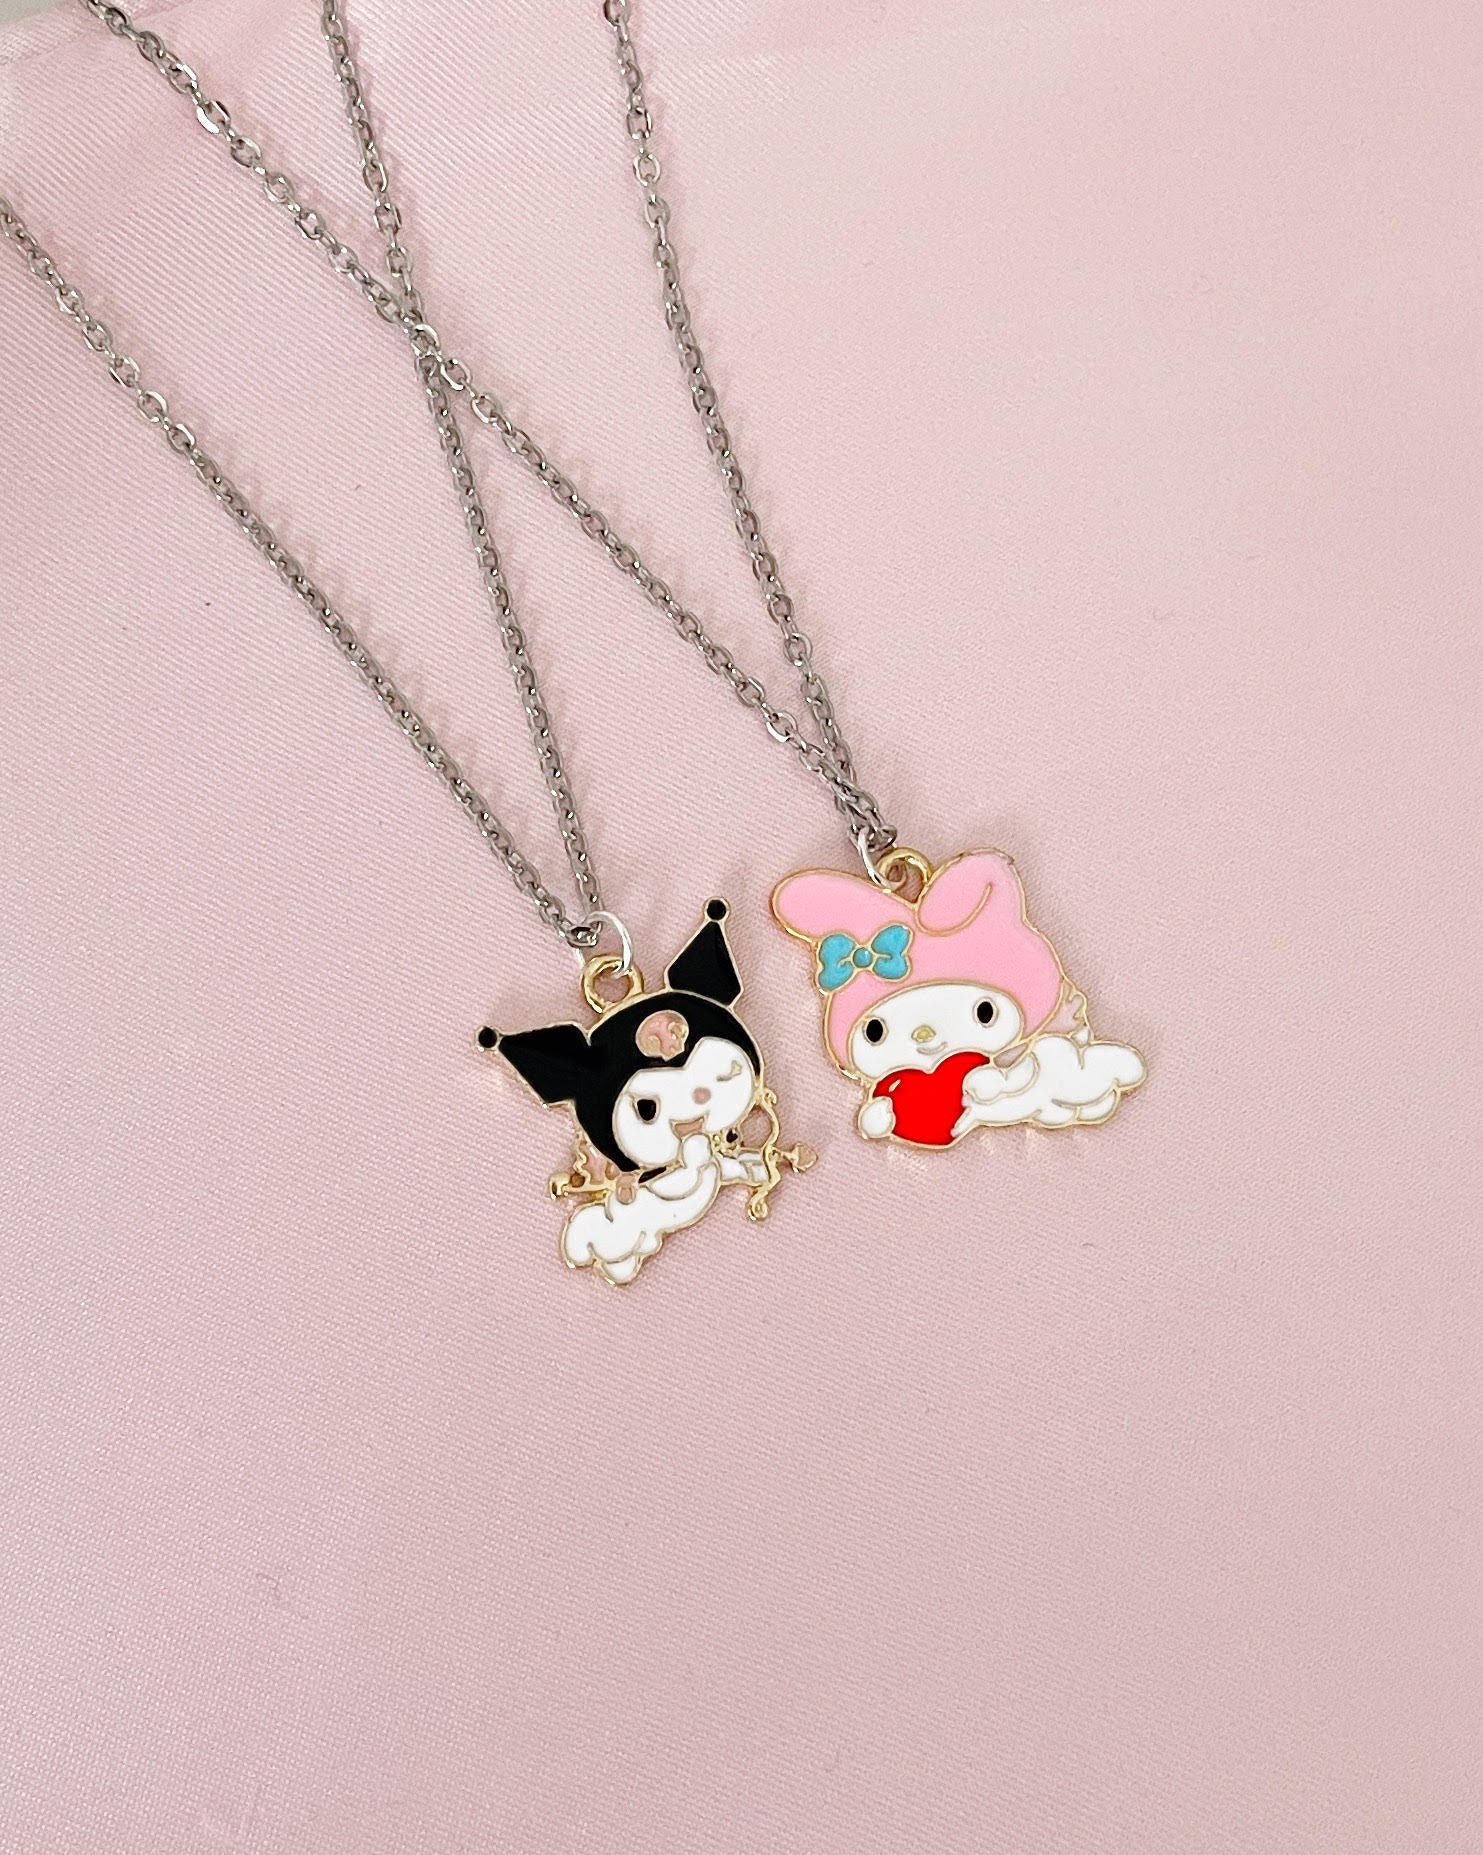 2 PCS/Set Fashion Cute Cat Couple Necklace BFF Good Friend Magnet Phase  Suction Pendant Valentine's Day Gift Friendship Jewelry